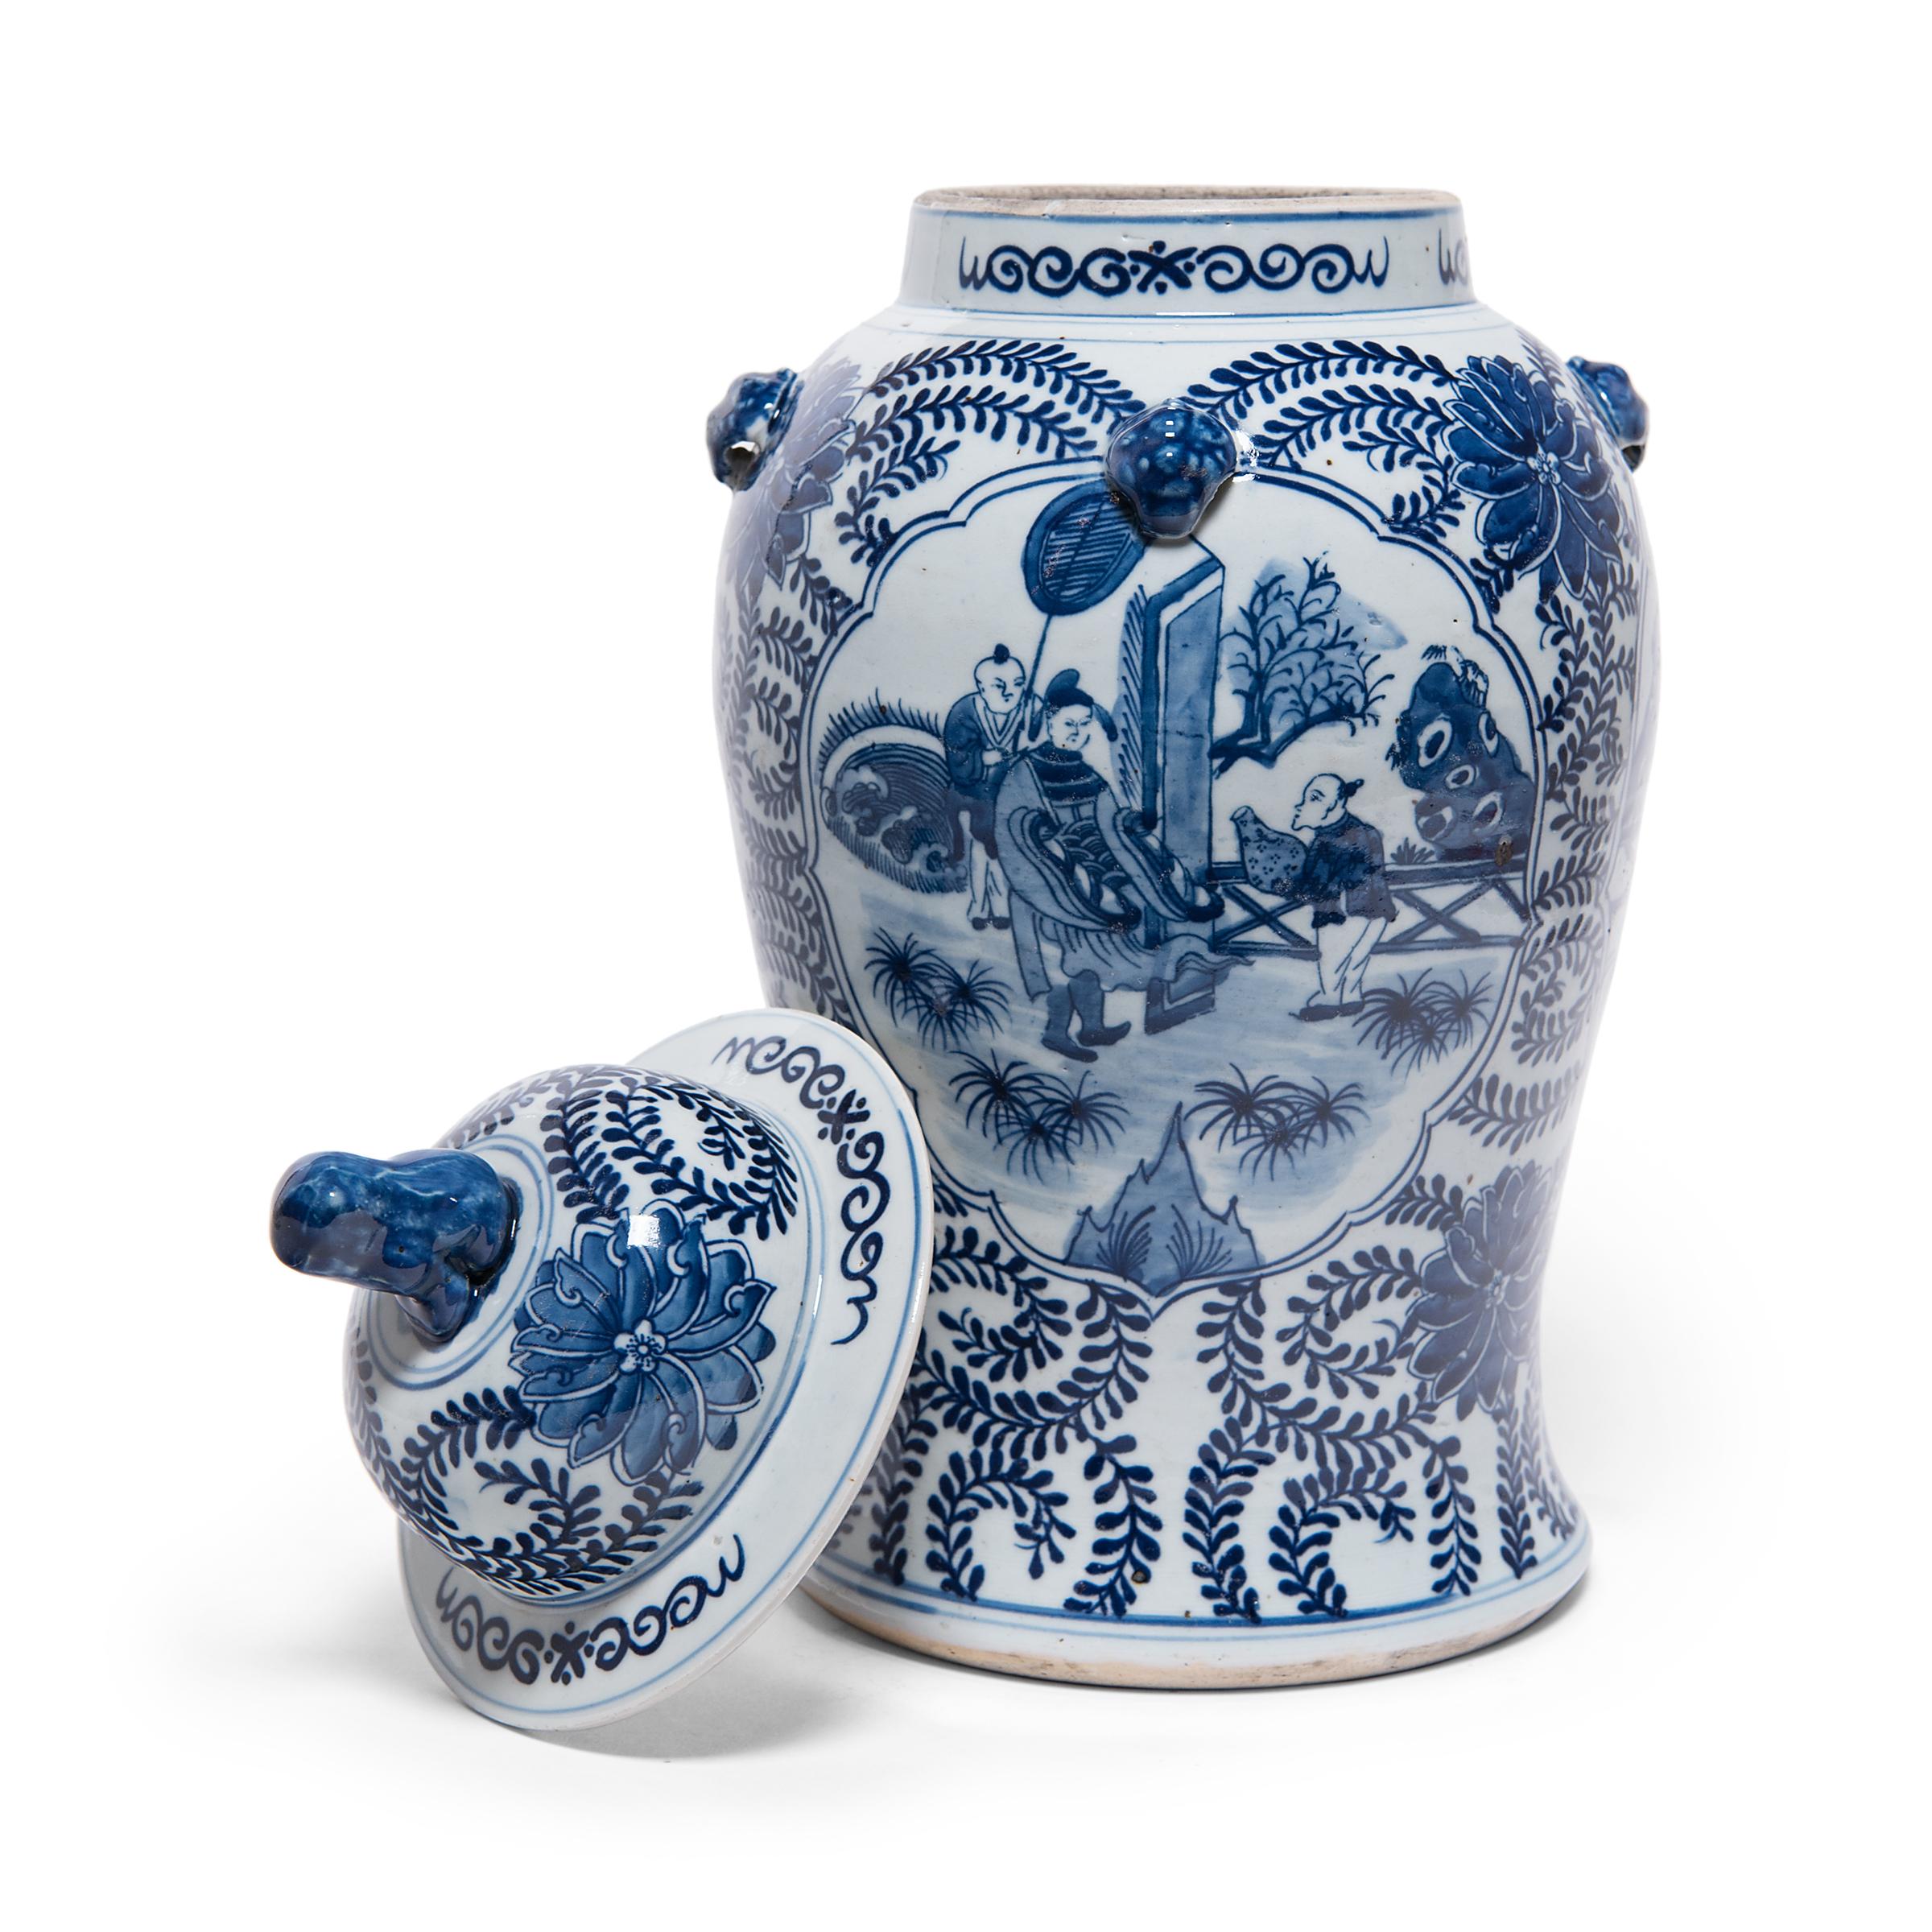 Contemporary Pair of Chinese Blue and White Garden Baluster Jars